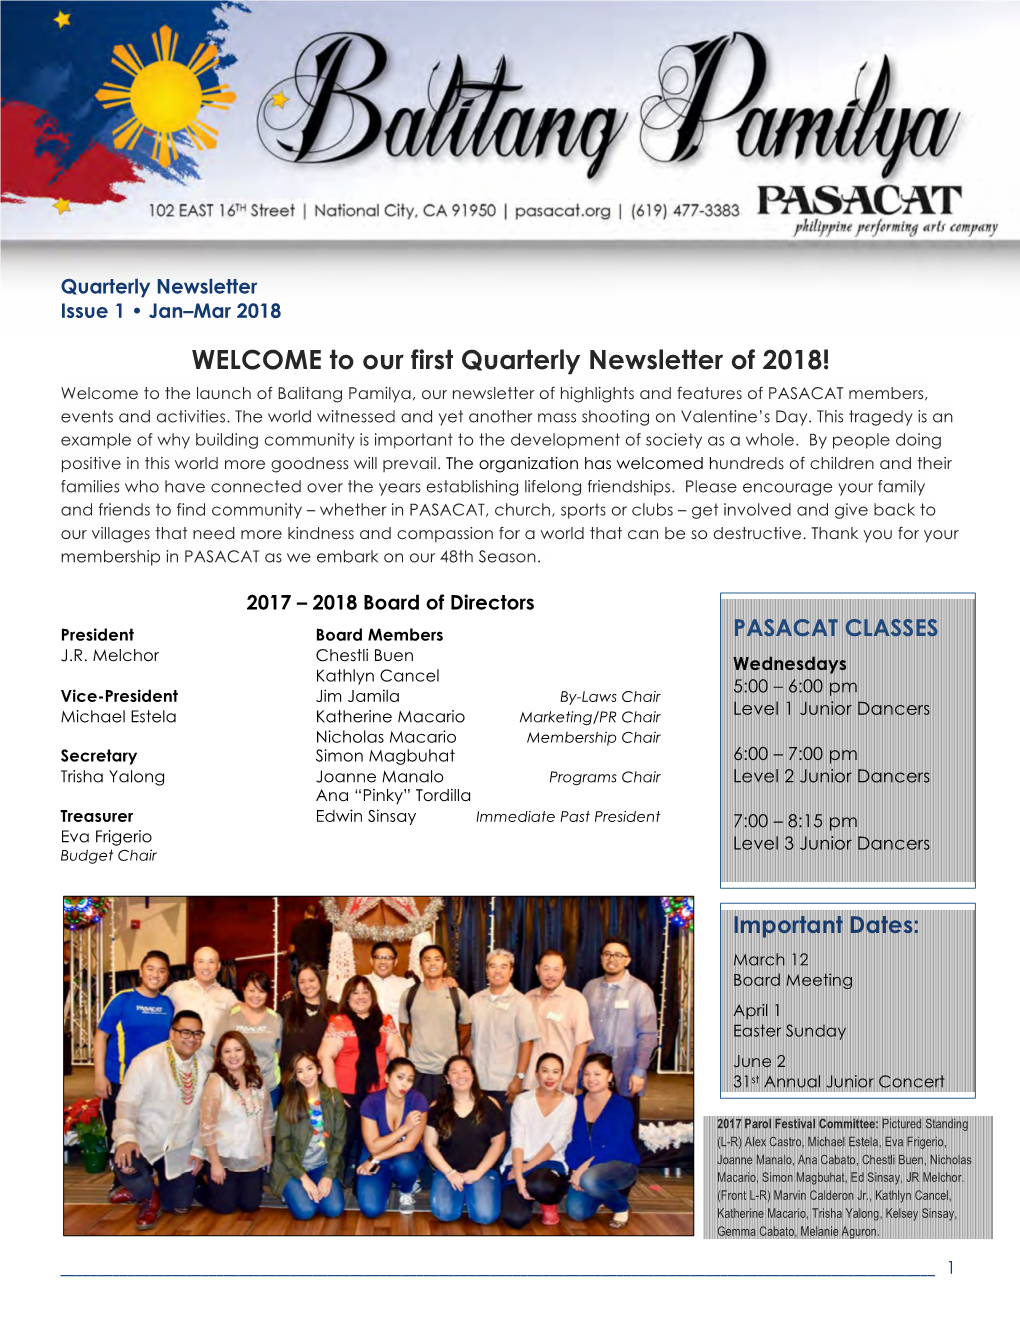 Our First Quarterly Newsletter of 2018! Welcome to the Launch of Balitang Pamilya, Our Newsletter of Highlights and Features of PASACAT Members, Events and Activities